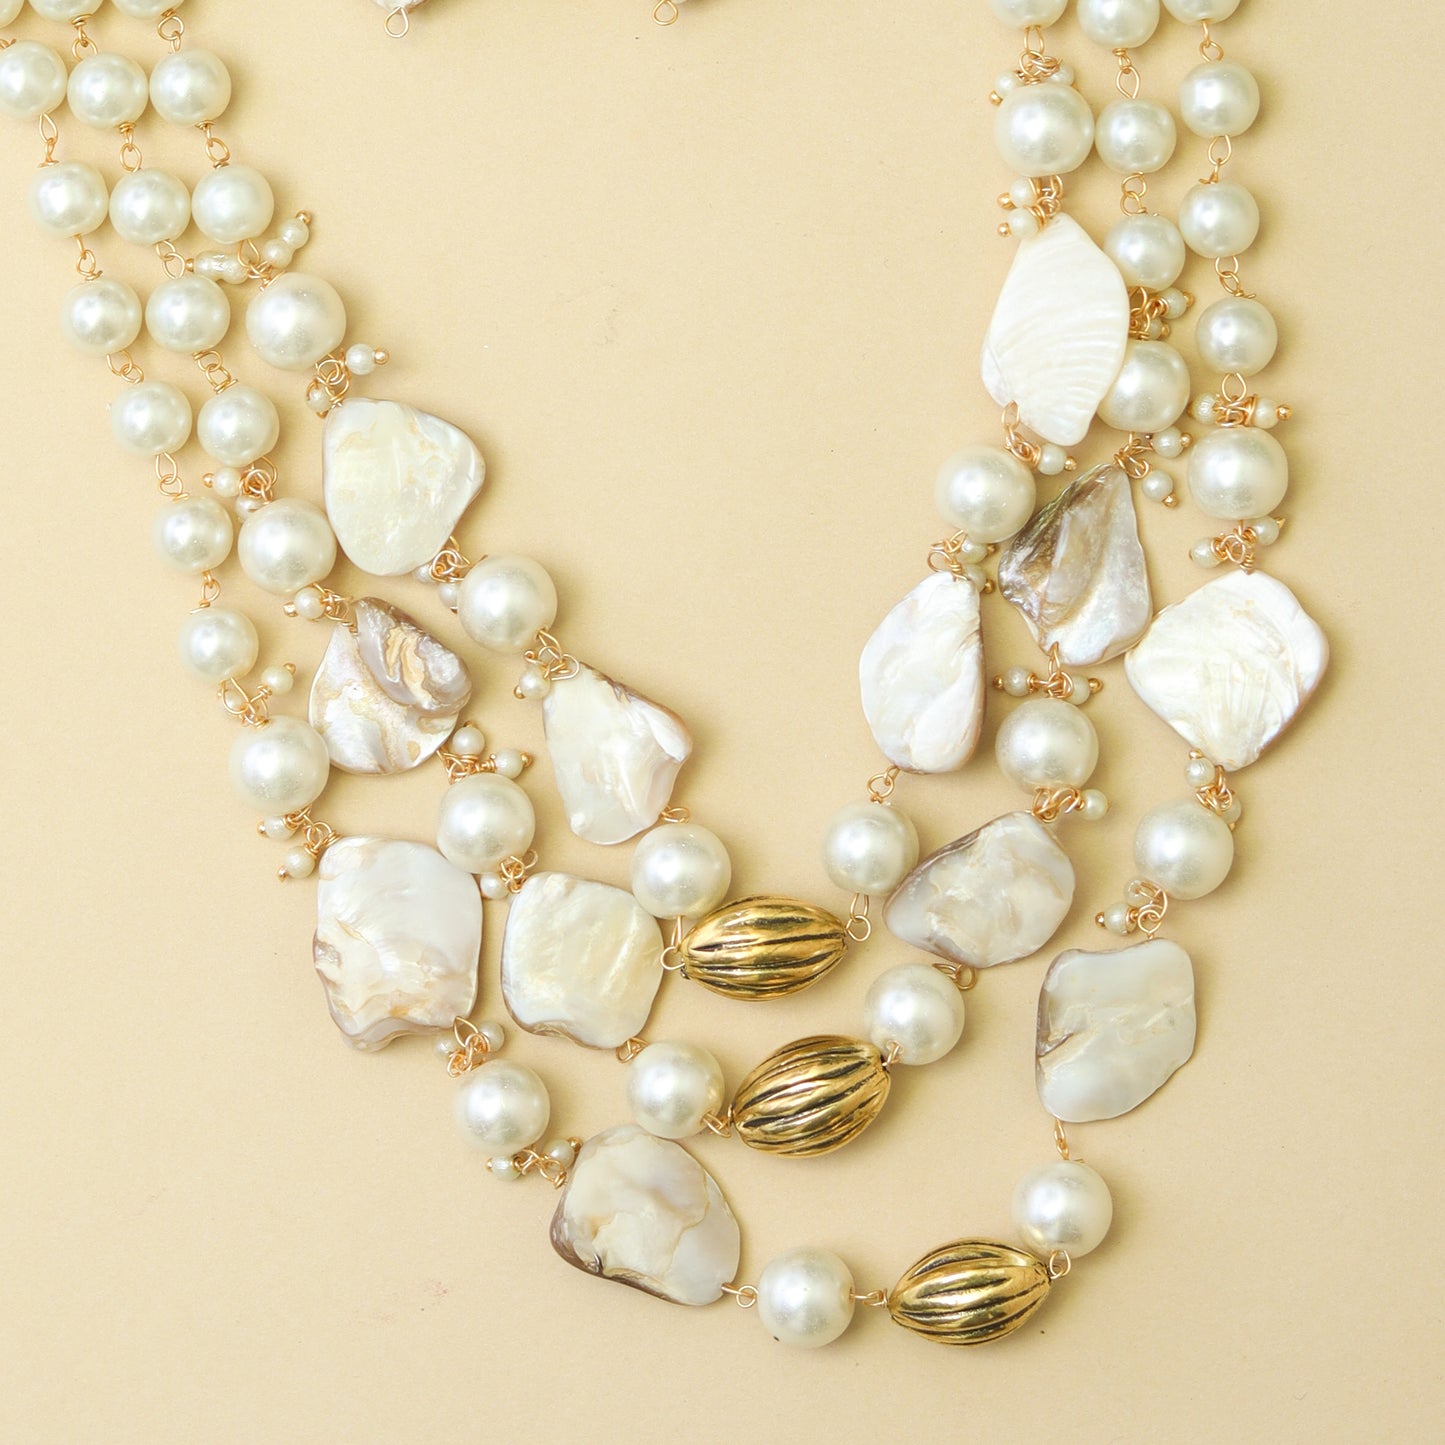 Madhura mother of pearl Necklace set with Earrings